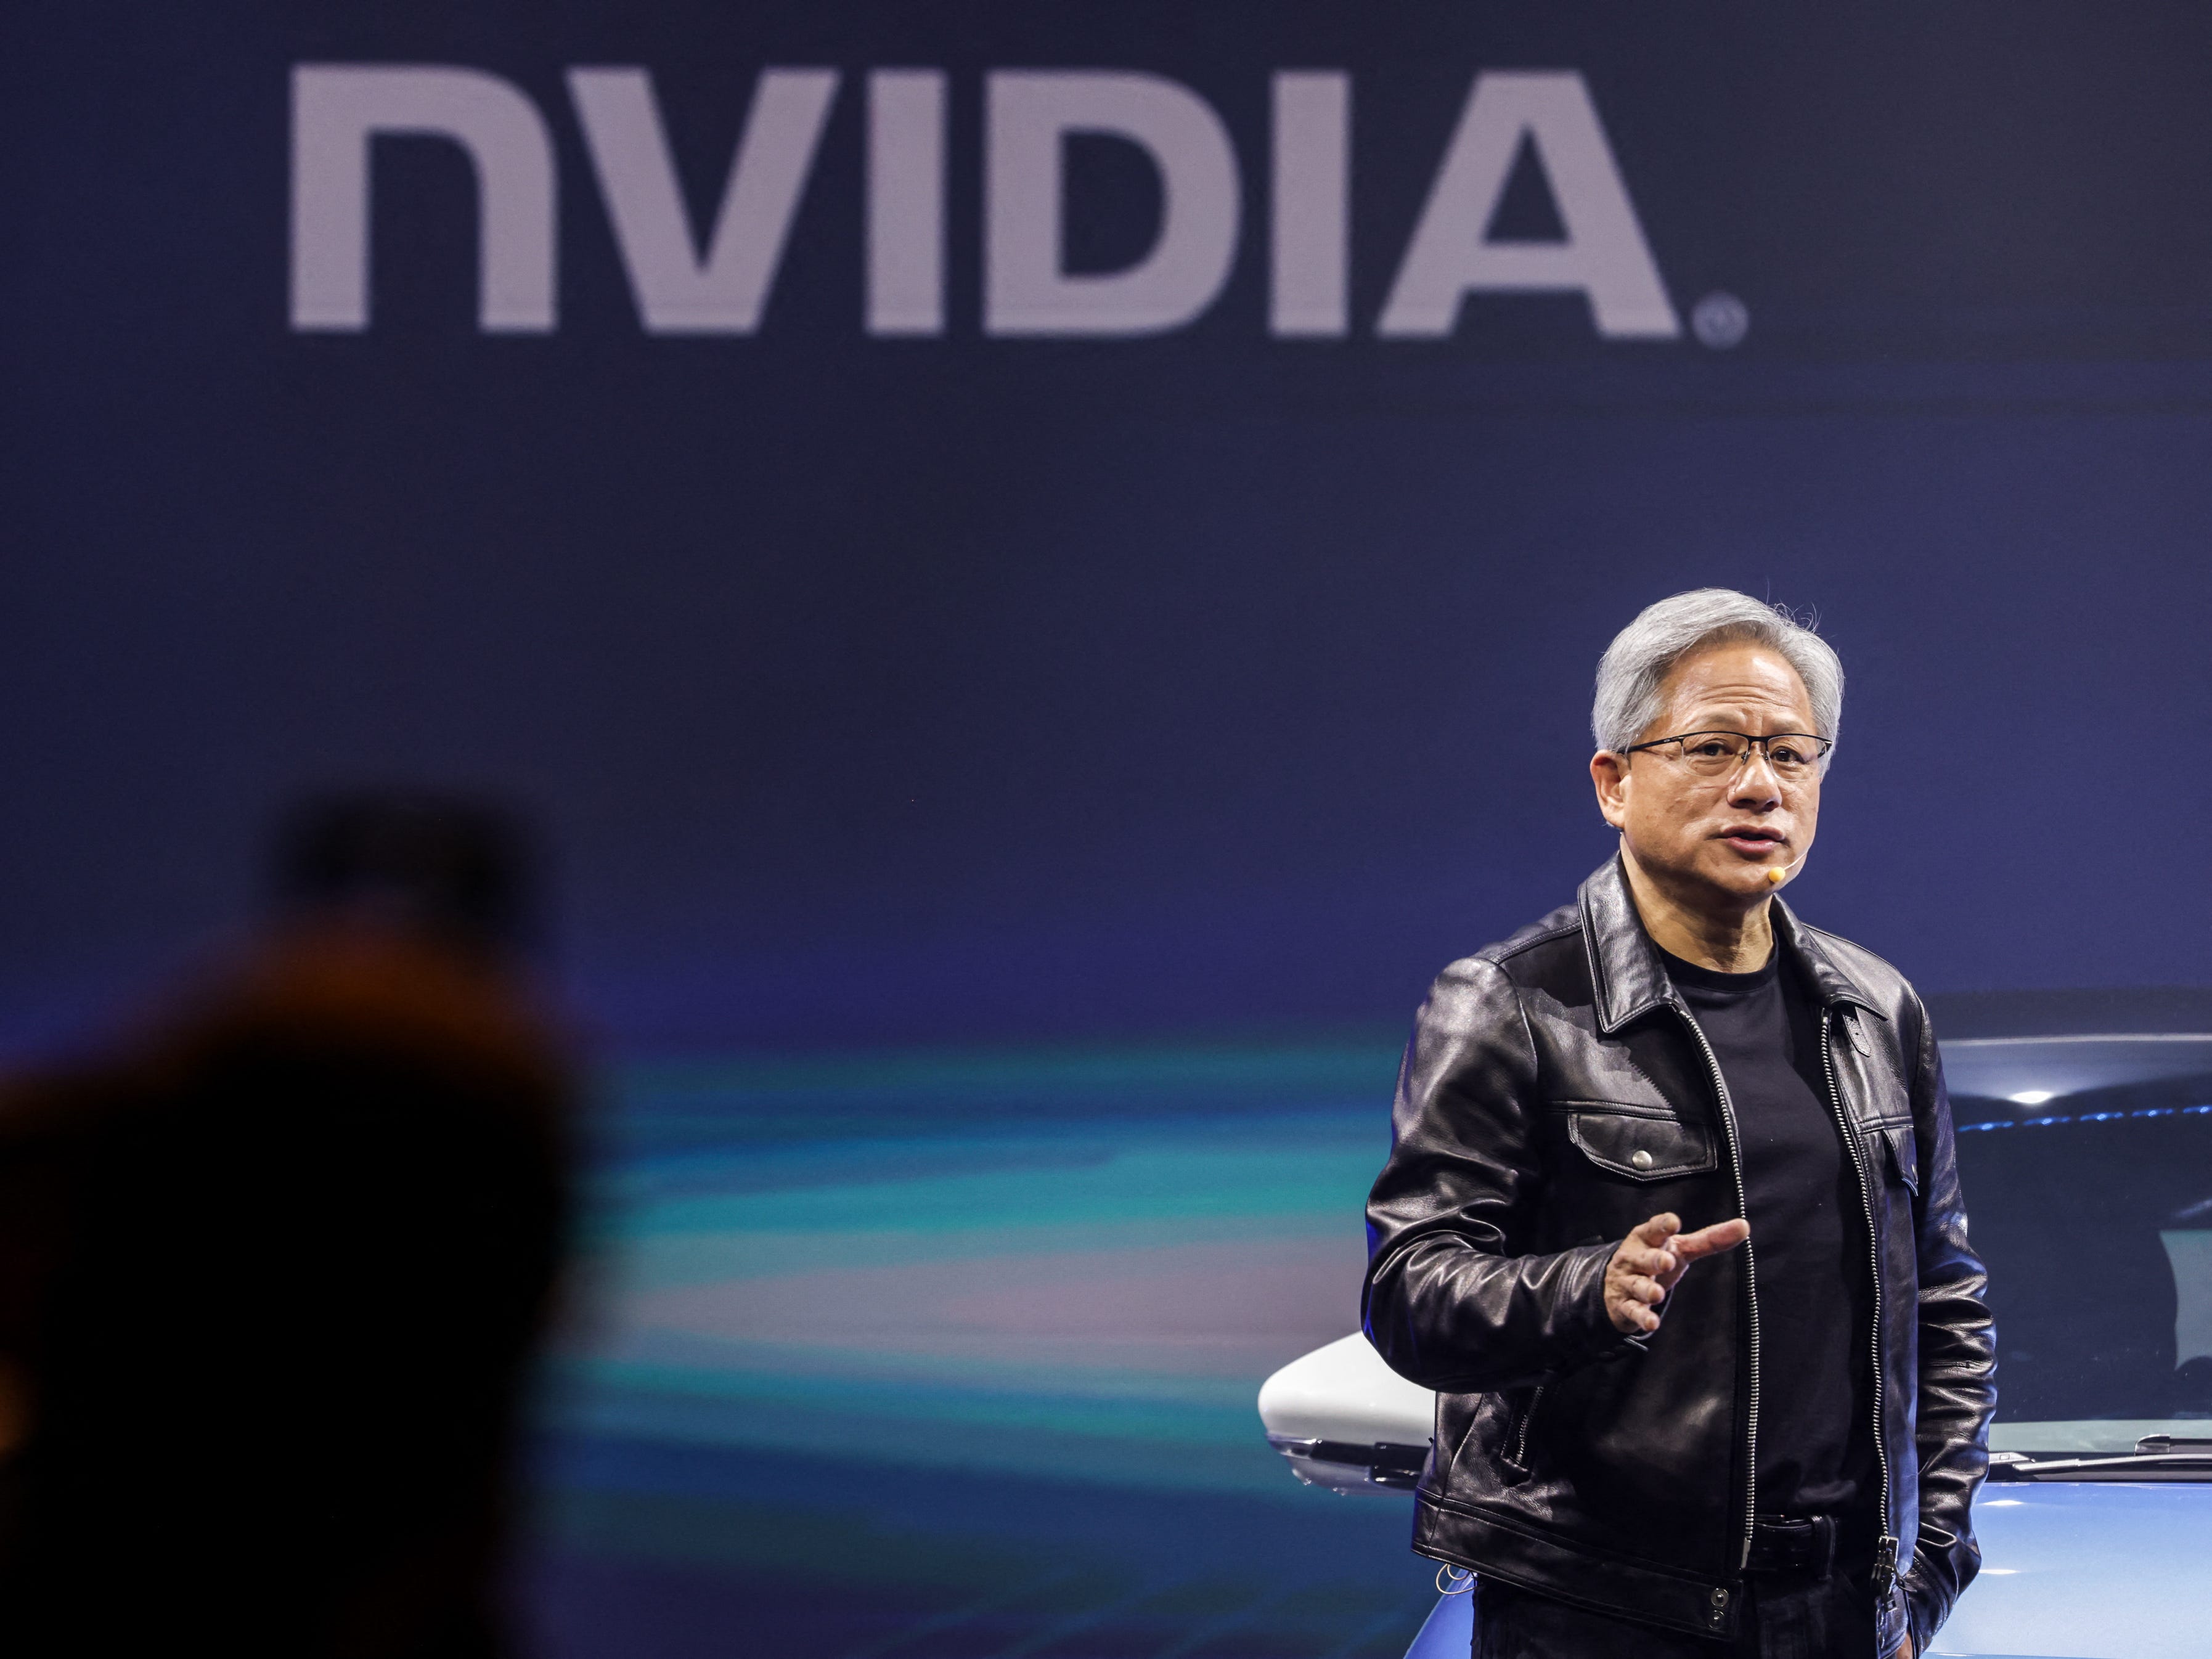 Nvidia's big day is here